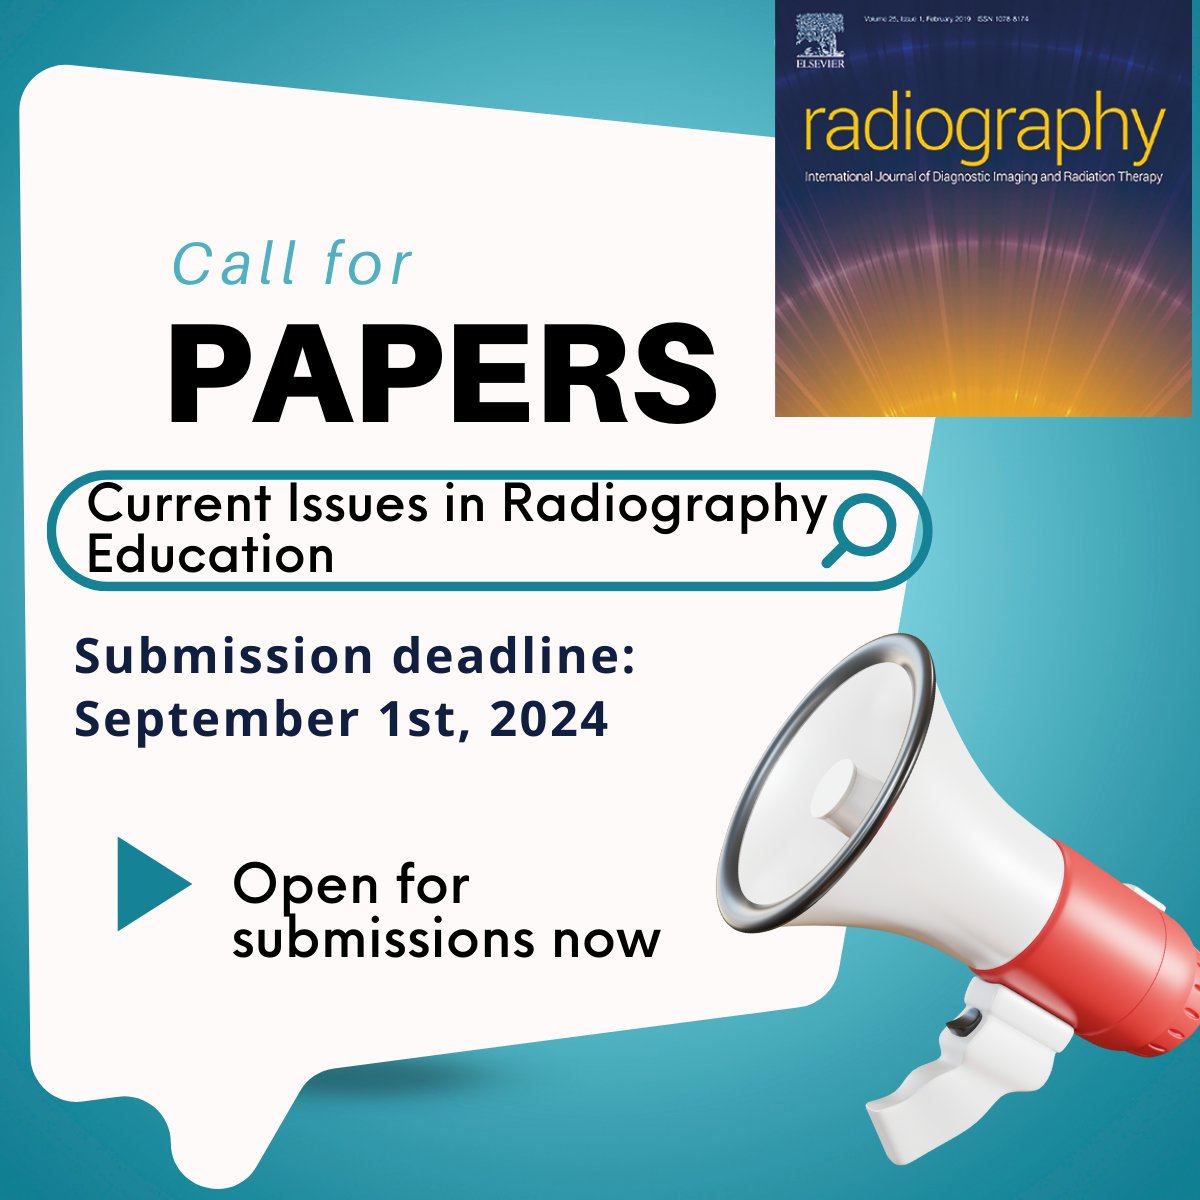 🚨📢We are currently seeking submissions for our upcoming Special Issue focusing on: Current Issues in Radiography Education You can read more about this exciting opportunity here: radiographyonline.com/call-for-paper… @Andrew_Tootell @LARdublin @YobelliJ @SCoRMembers @EFRadiographerS